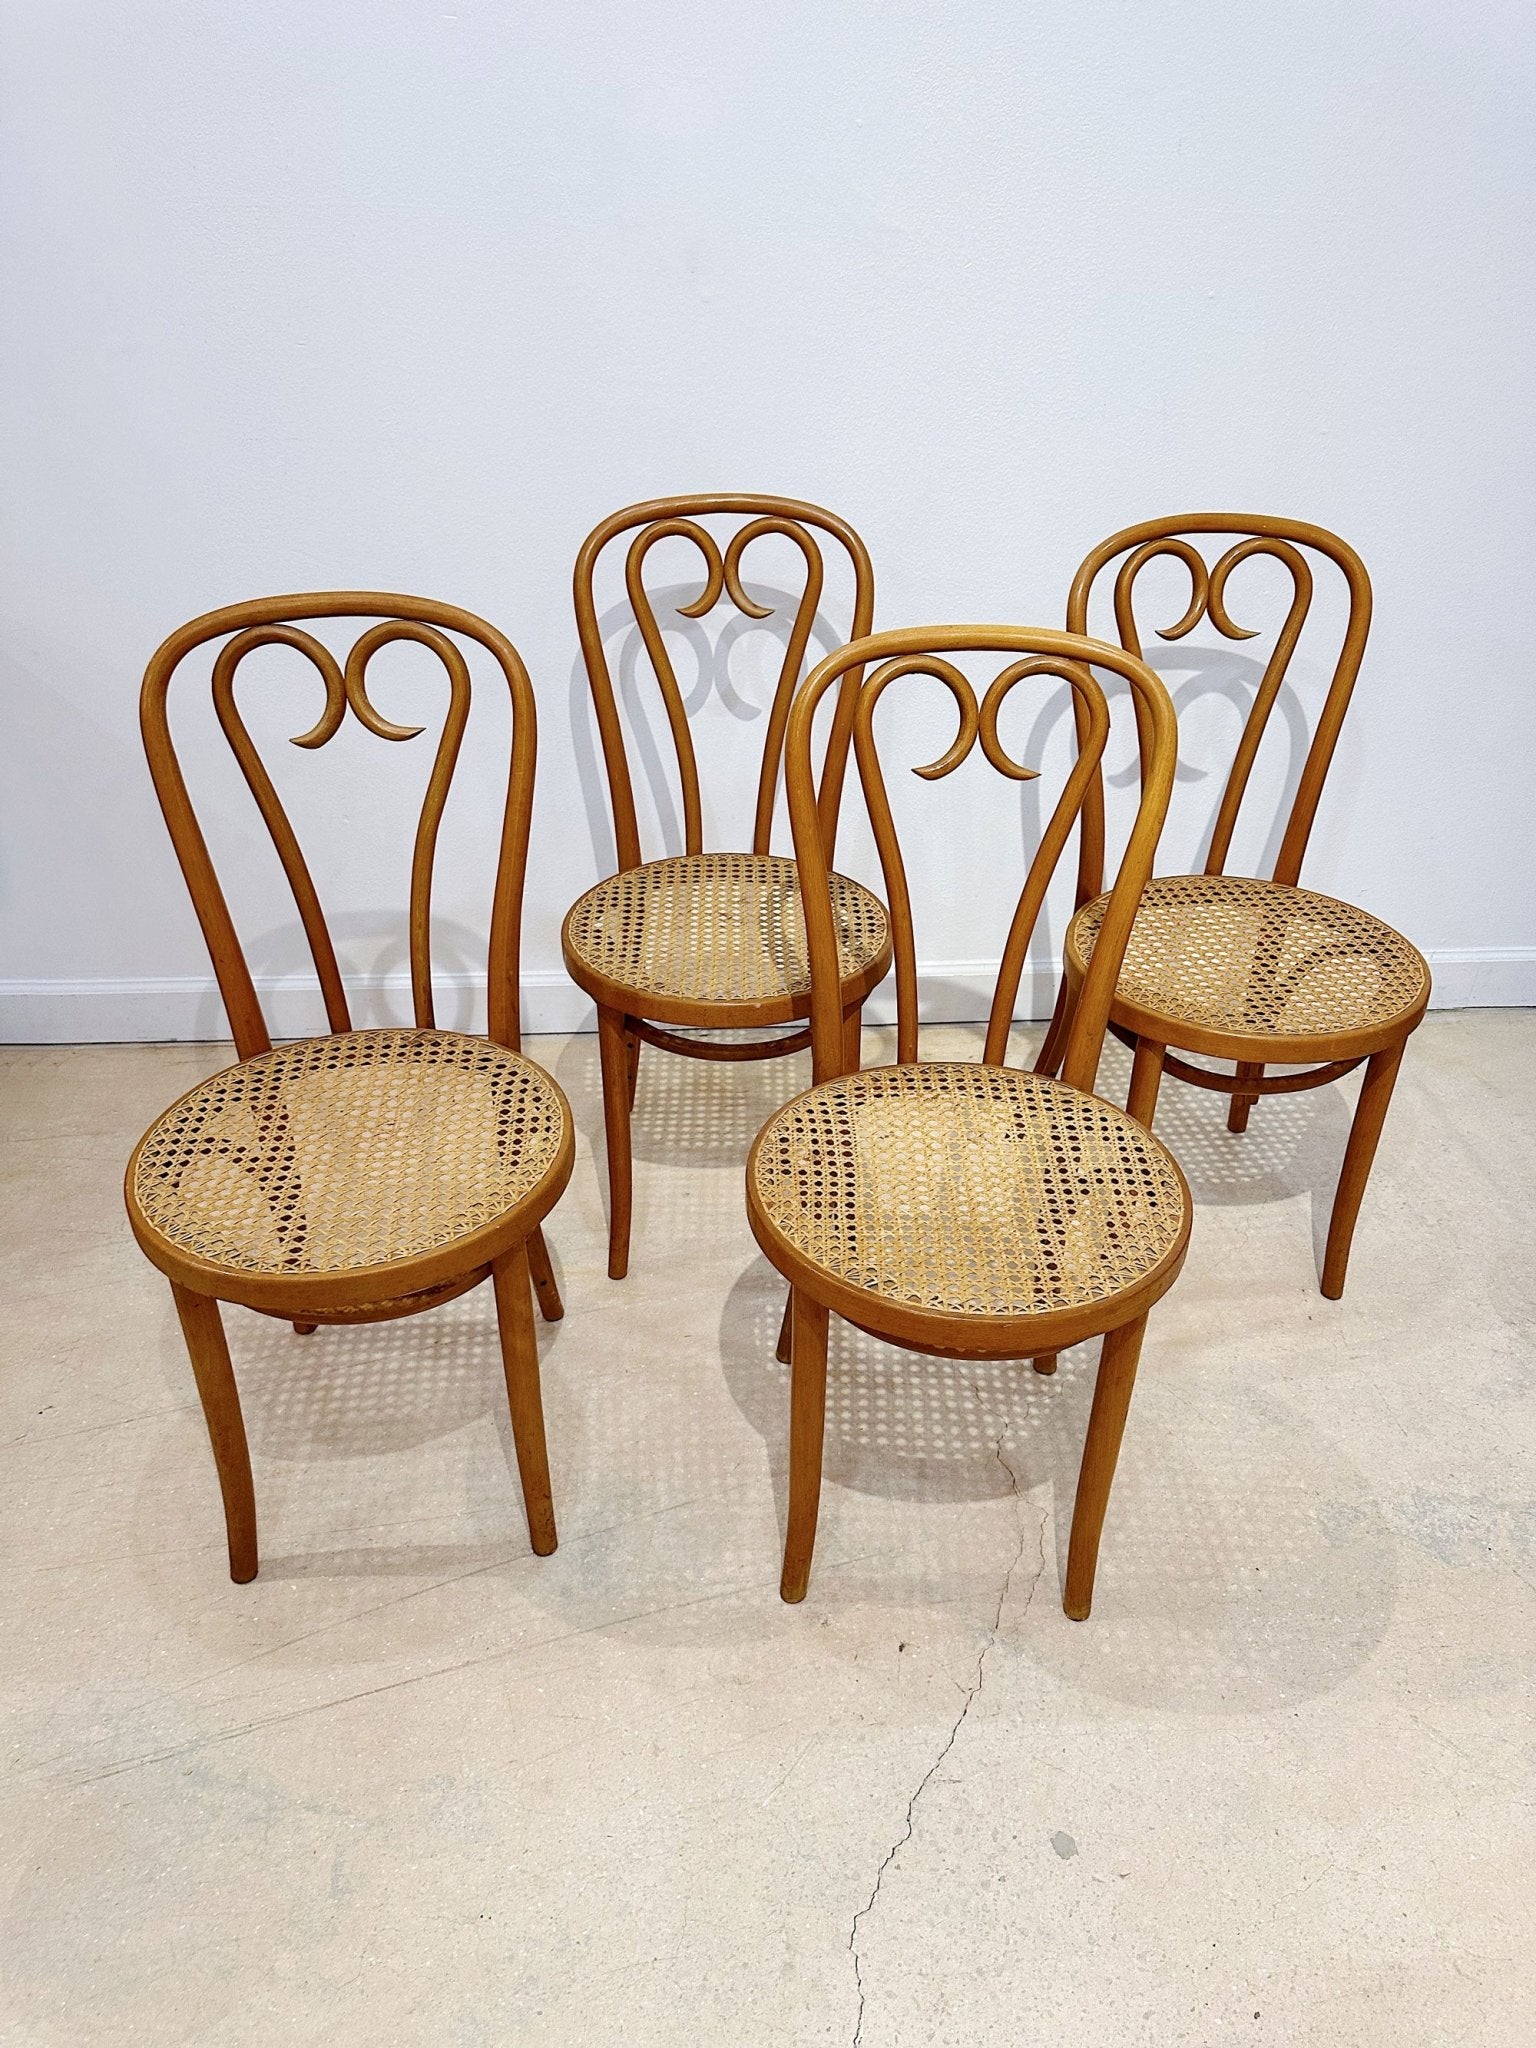 Thonet-style Bentwood Chairs (x4) - Rehaus